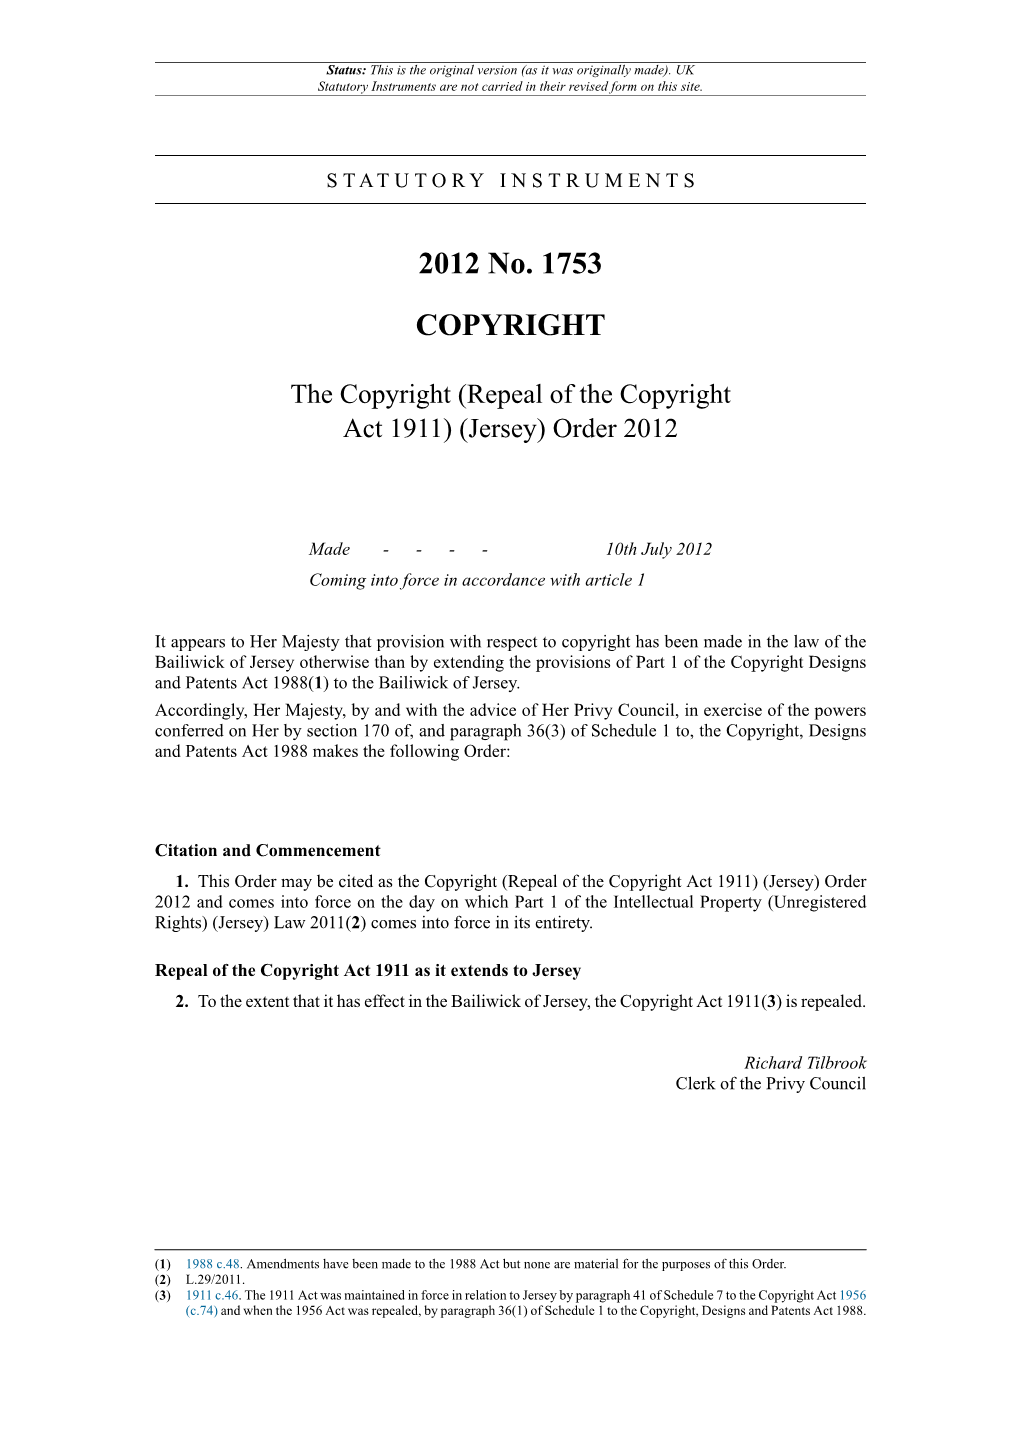 (Repeal of the Copyright Act 1911) (Jersey) Order 2012